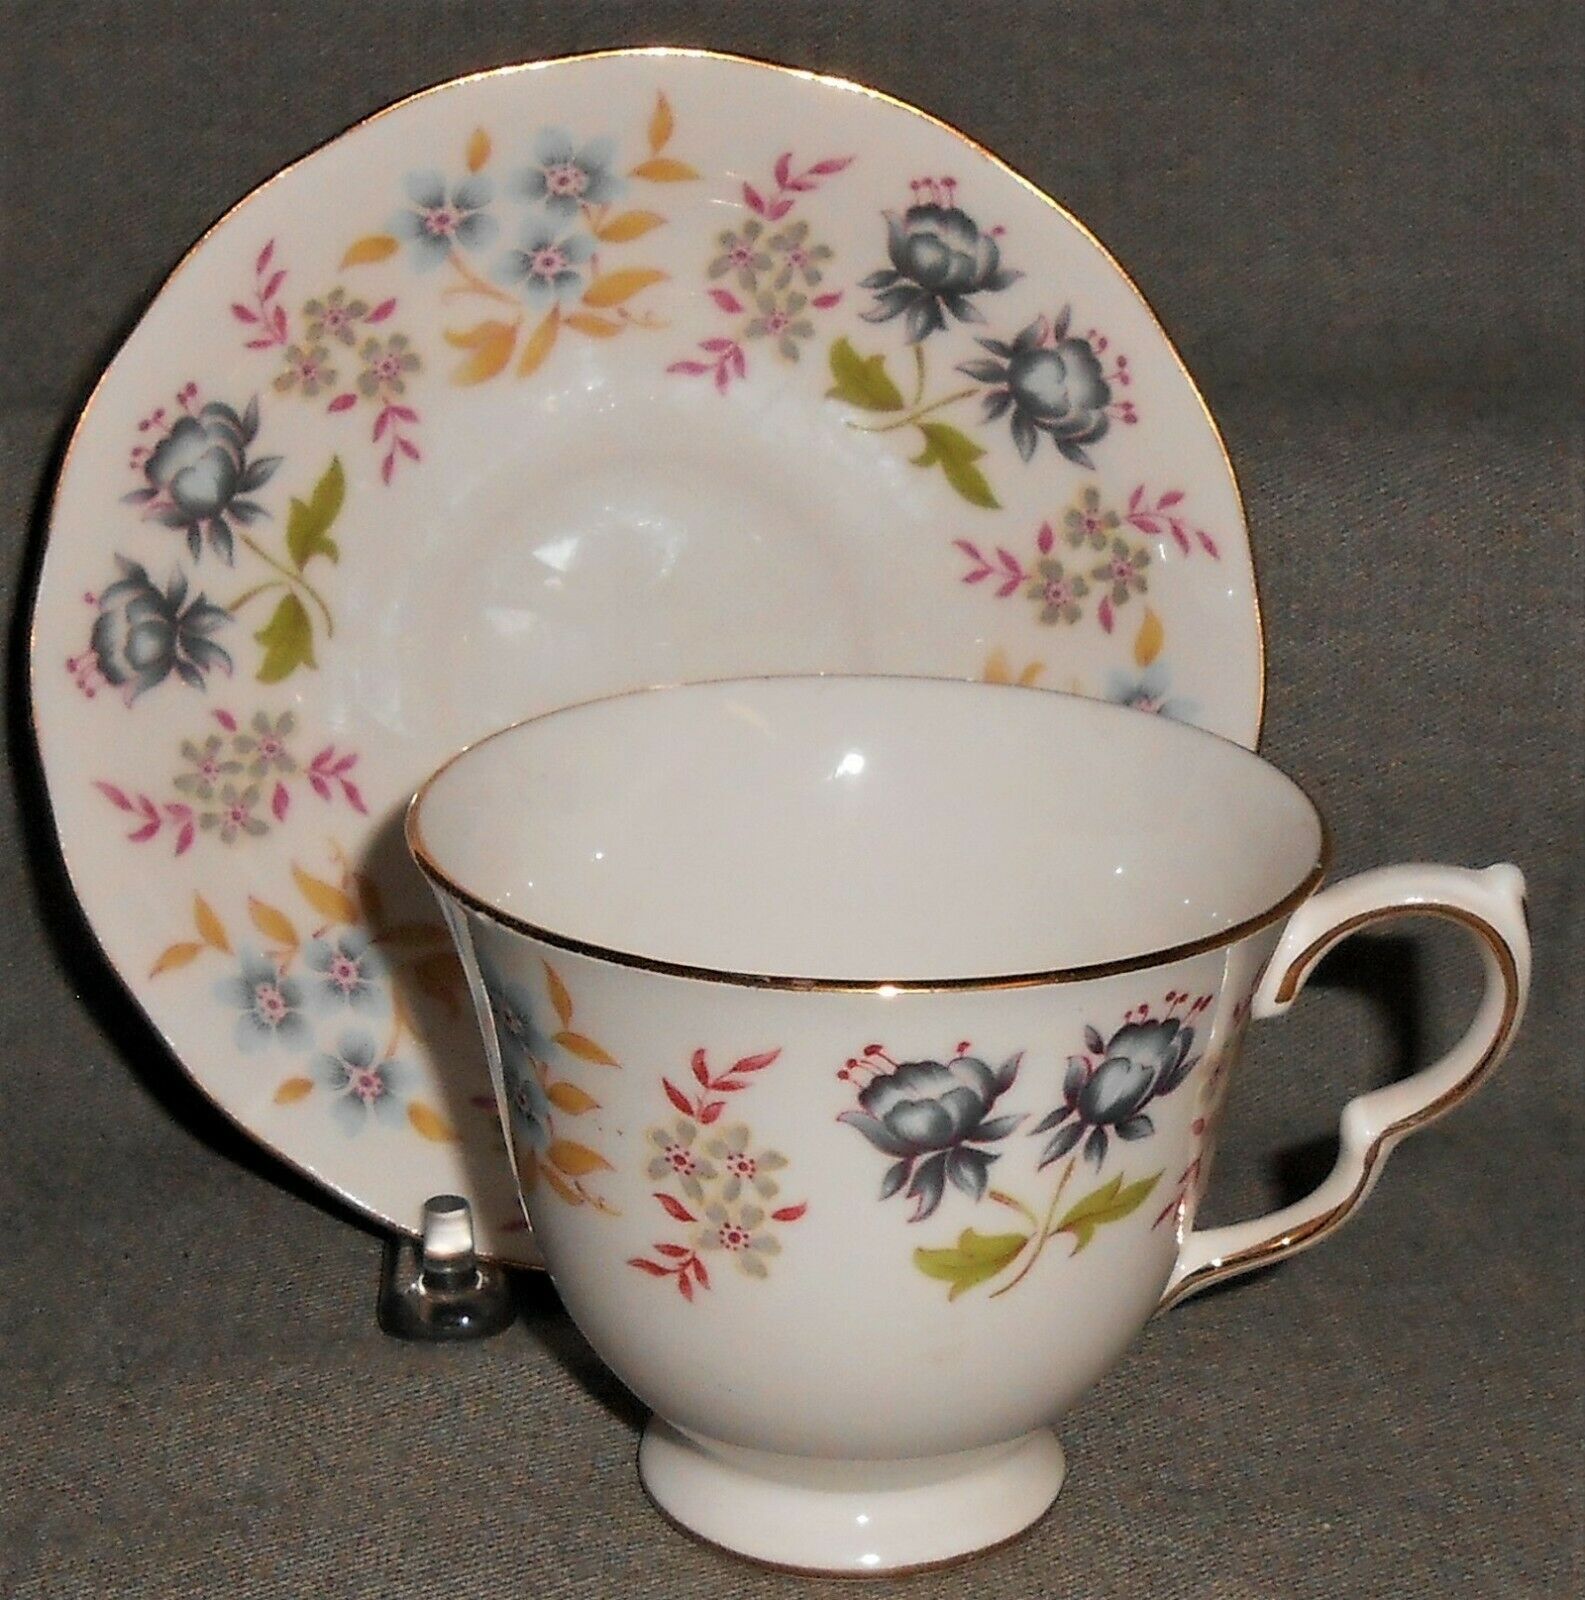 Primary image for QUEEN ANNE Bone China FLOWER BASKET MOTIF Cup and Saucer MADE IN ENGLAND